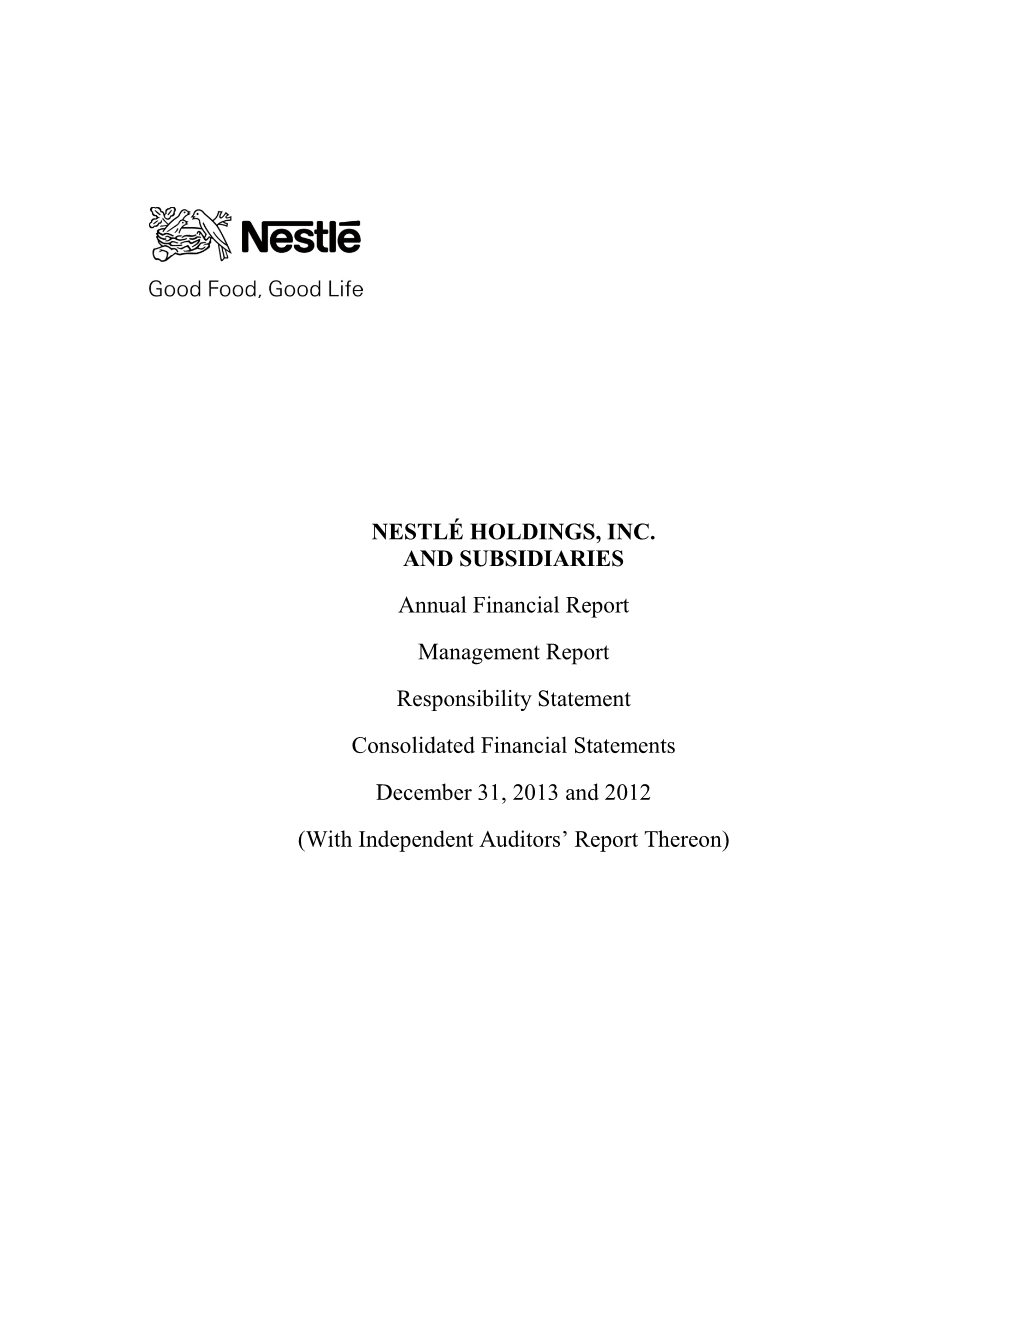 NESTLÉ HOLDINGS, INC. and SUBSIDIARIES Annual Financial Report Management Report Responsibility Statement Consolidated Financial Statements